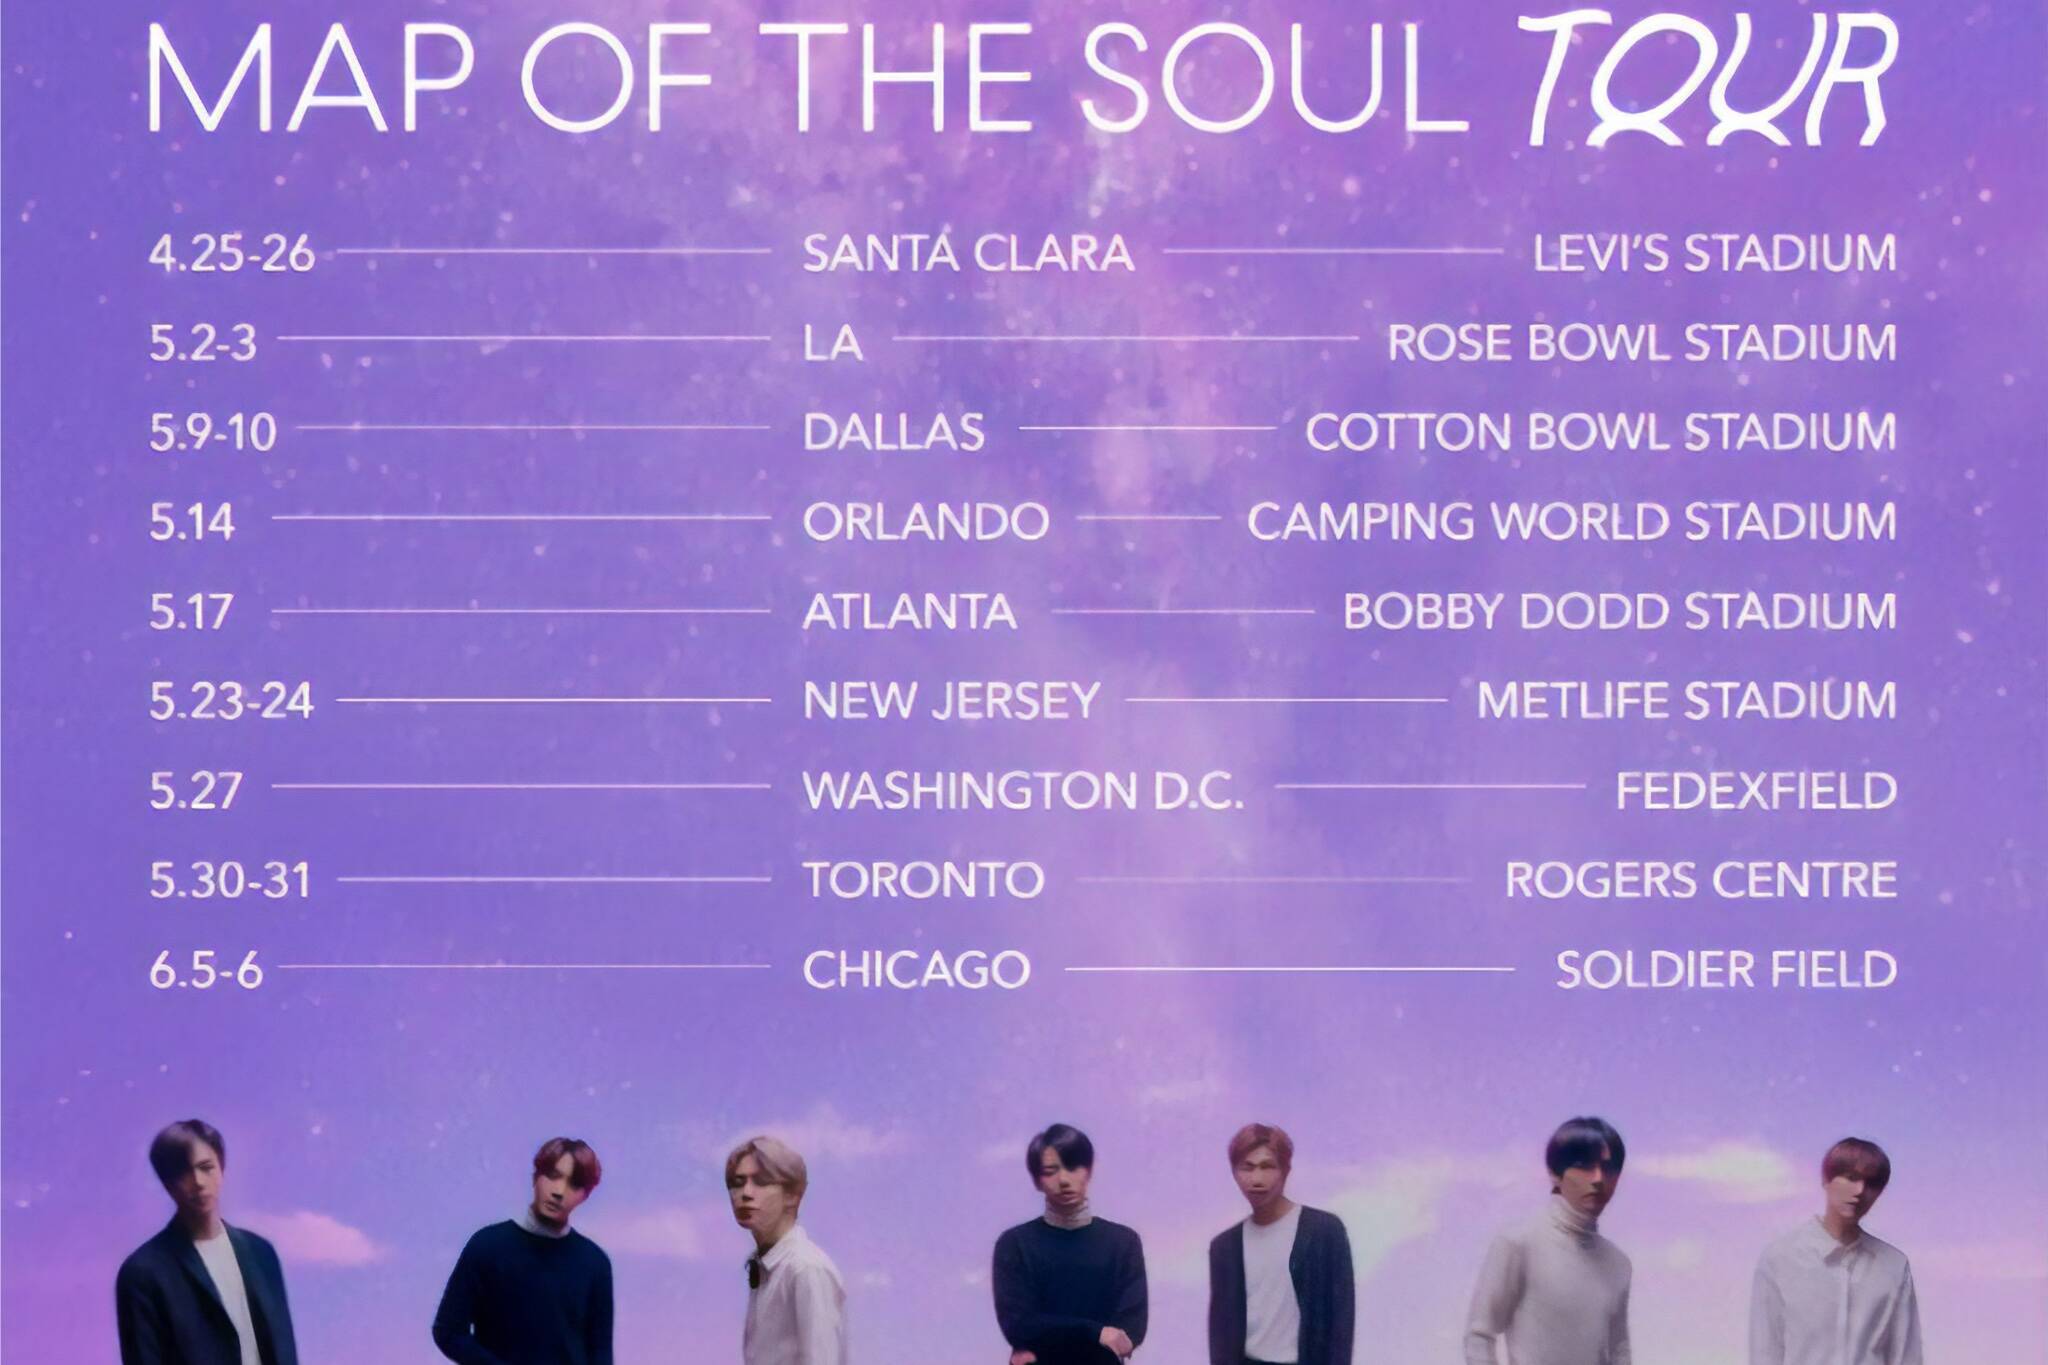 BTS is officially coming to Toronto on their 2020 concert